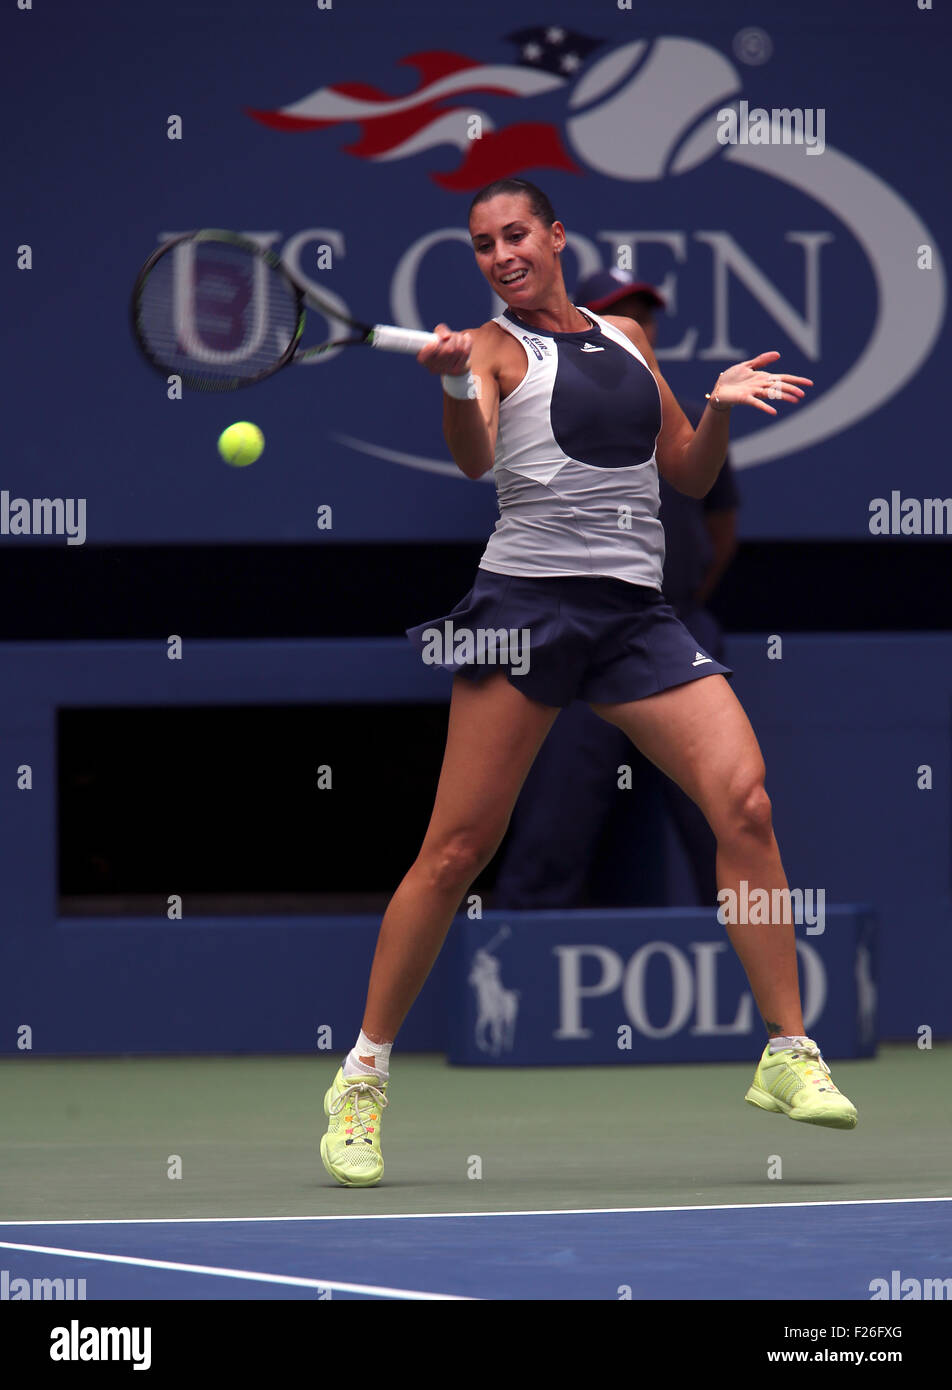 New York, USA. 12th Sep, 2015. Flavia Penetta of Italy returns a shot to countrywoman Roberta Vinci during the women's final of the U.S. Open at Flushing Meadows, New York on the afternoon of September 12th, 2015.  Pennetta won the match 7-6 (7-4), 6-2 Credit:  Adam Stoltman/Alamy Live News Stock Photo